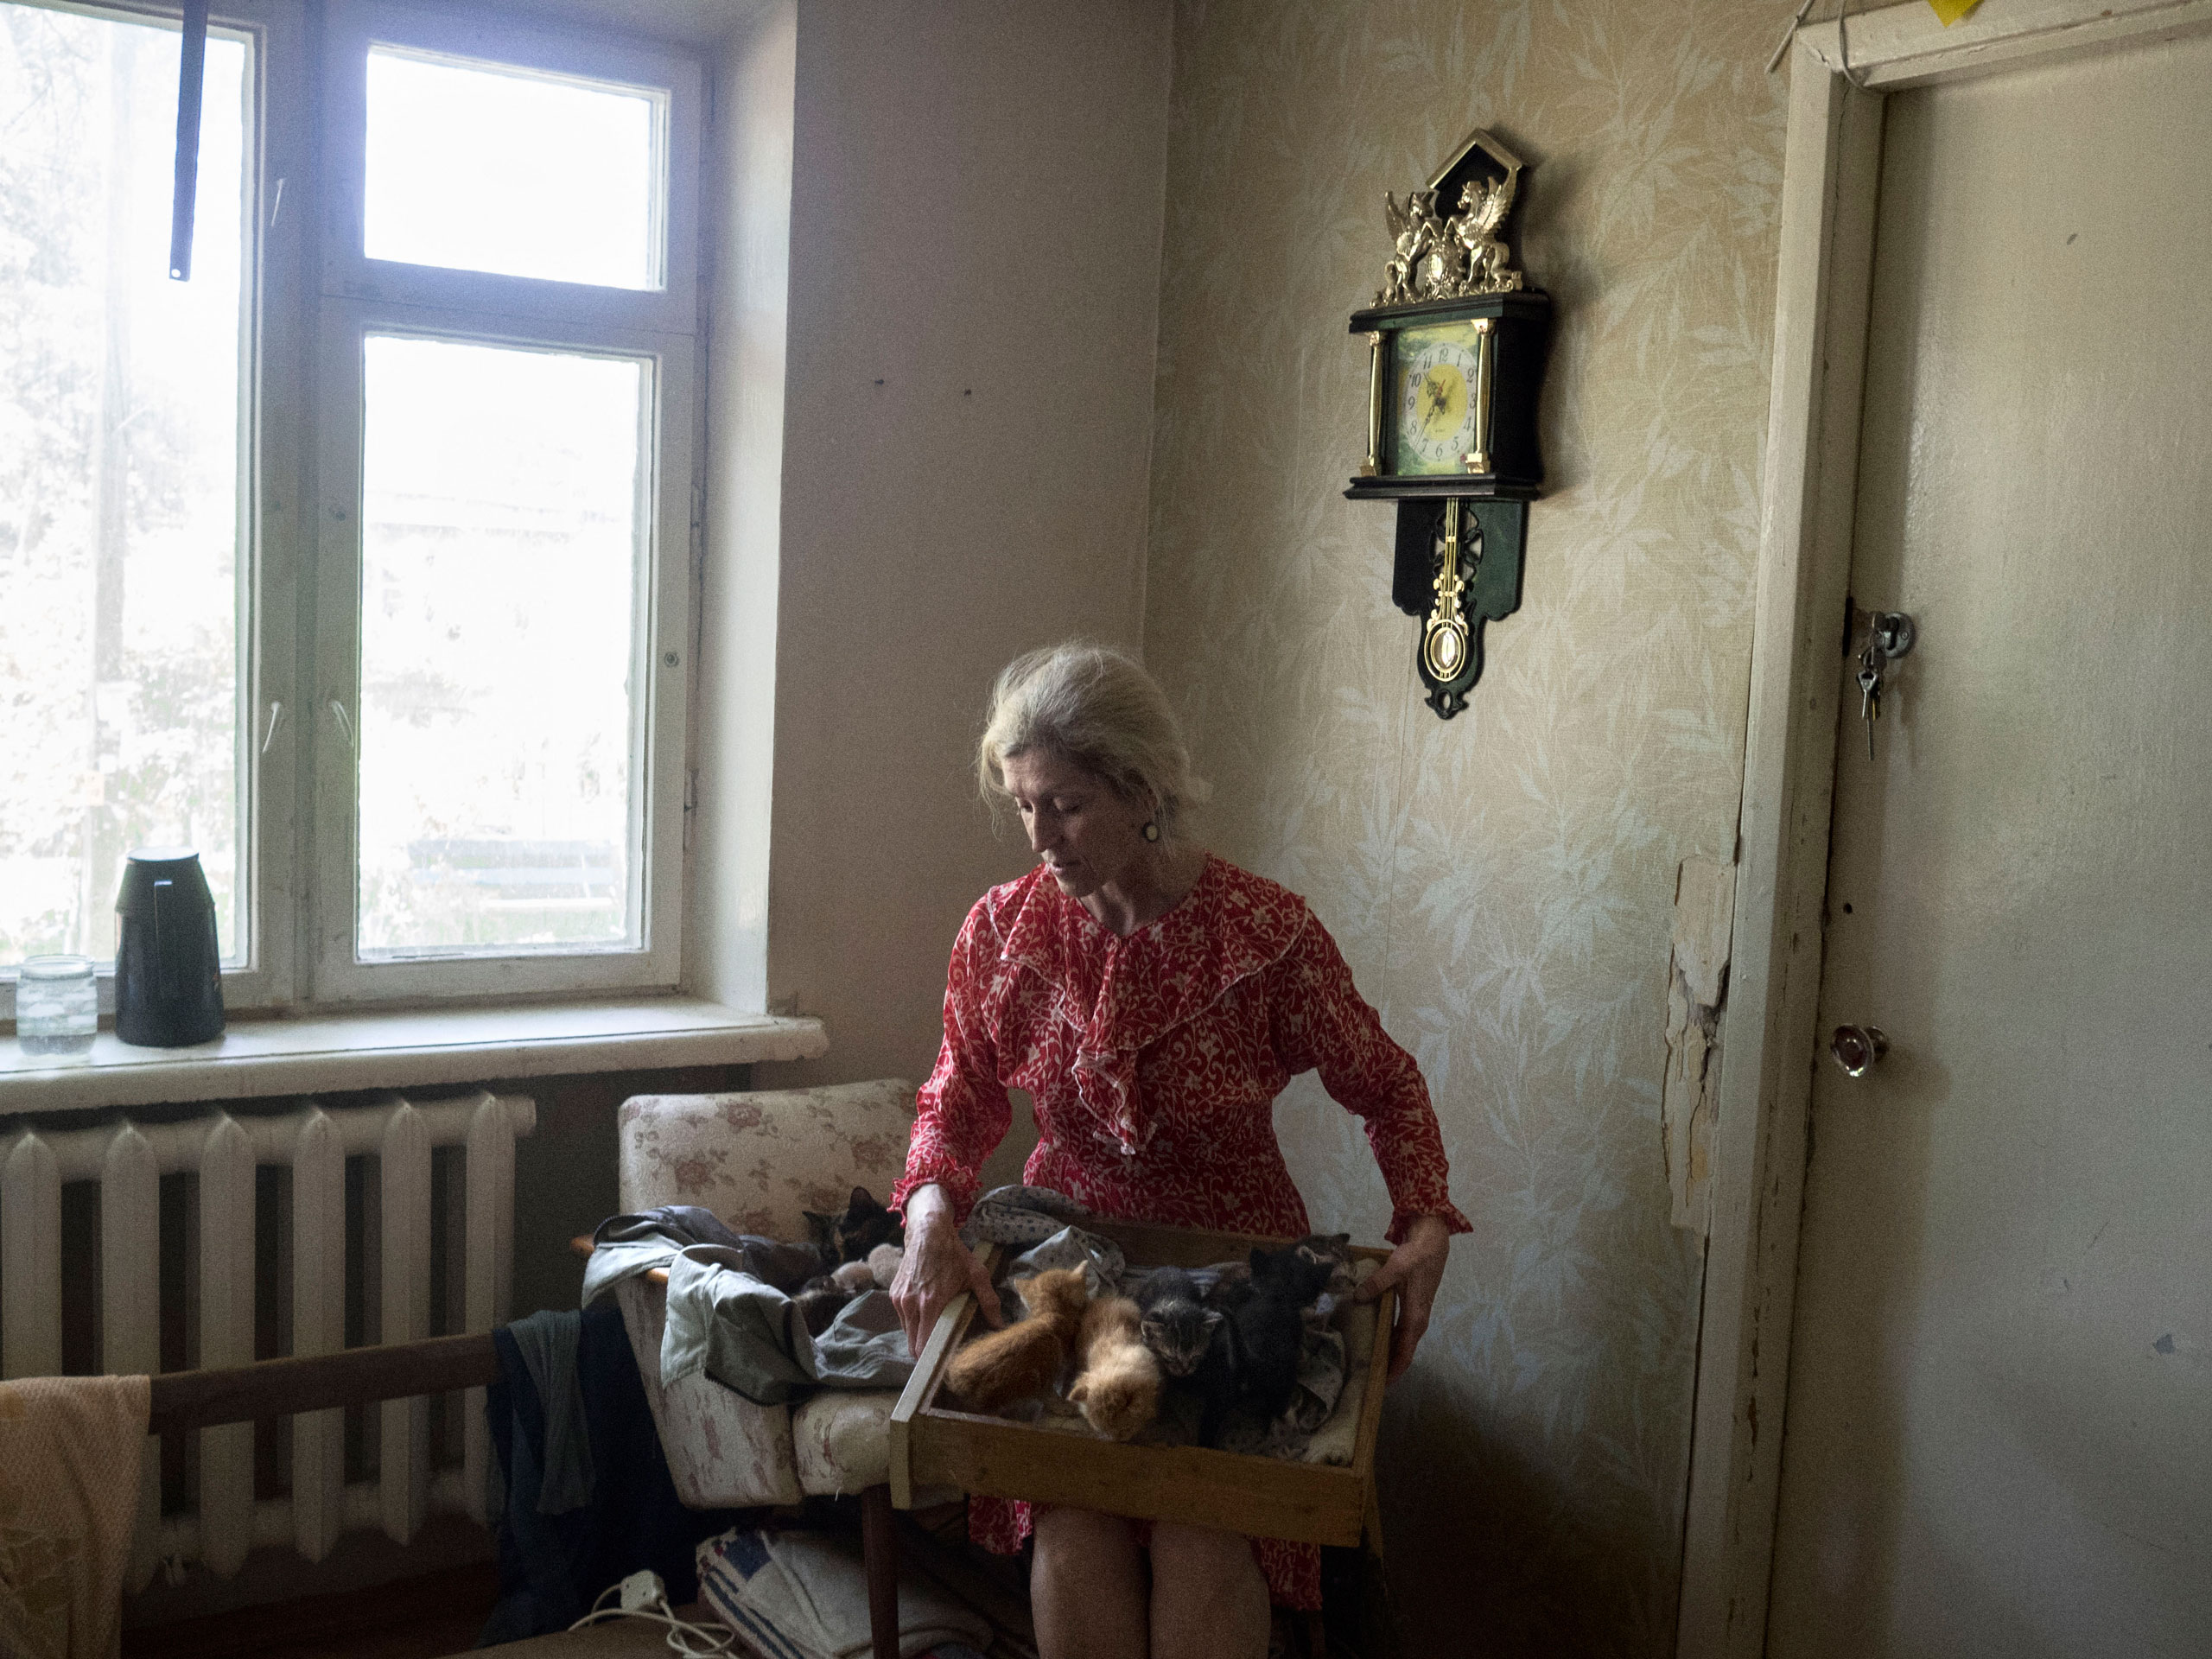 Natalia Vynokurova, a former pianist who used to live in Russia, is jobless and survives selling dishes in the street that she prepares. Mariupol, Ukraine. May 26, 2015.